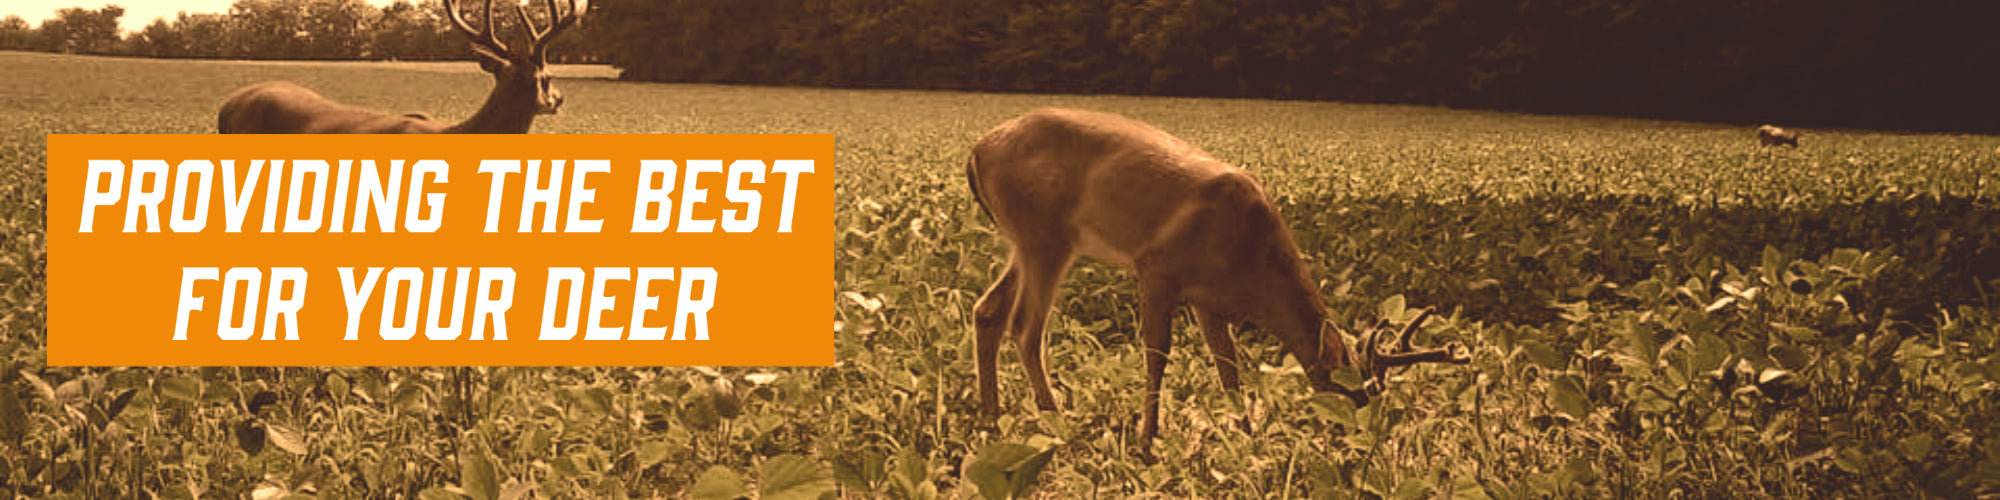 Text on image saying, "providing the best for your deer". Image has two deer eating in a food plot